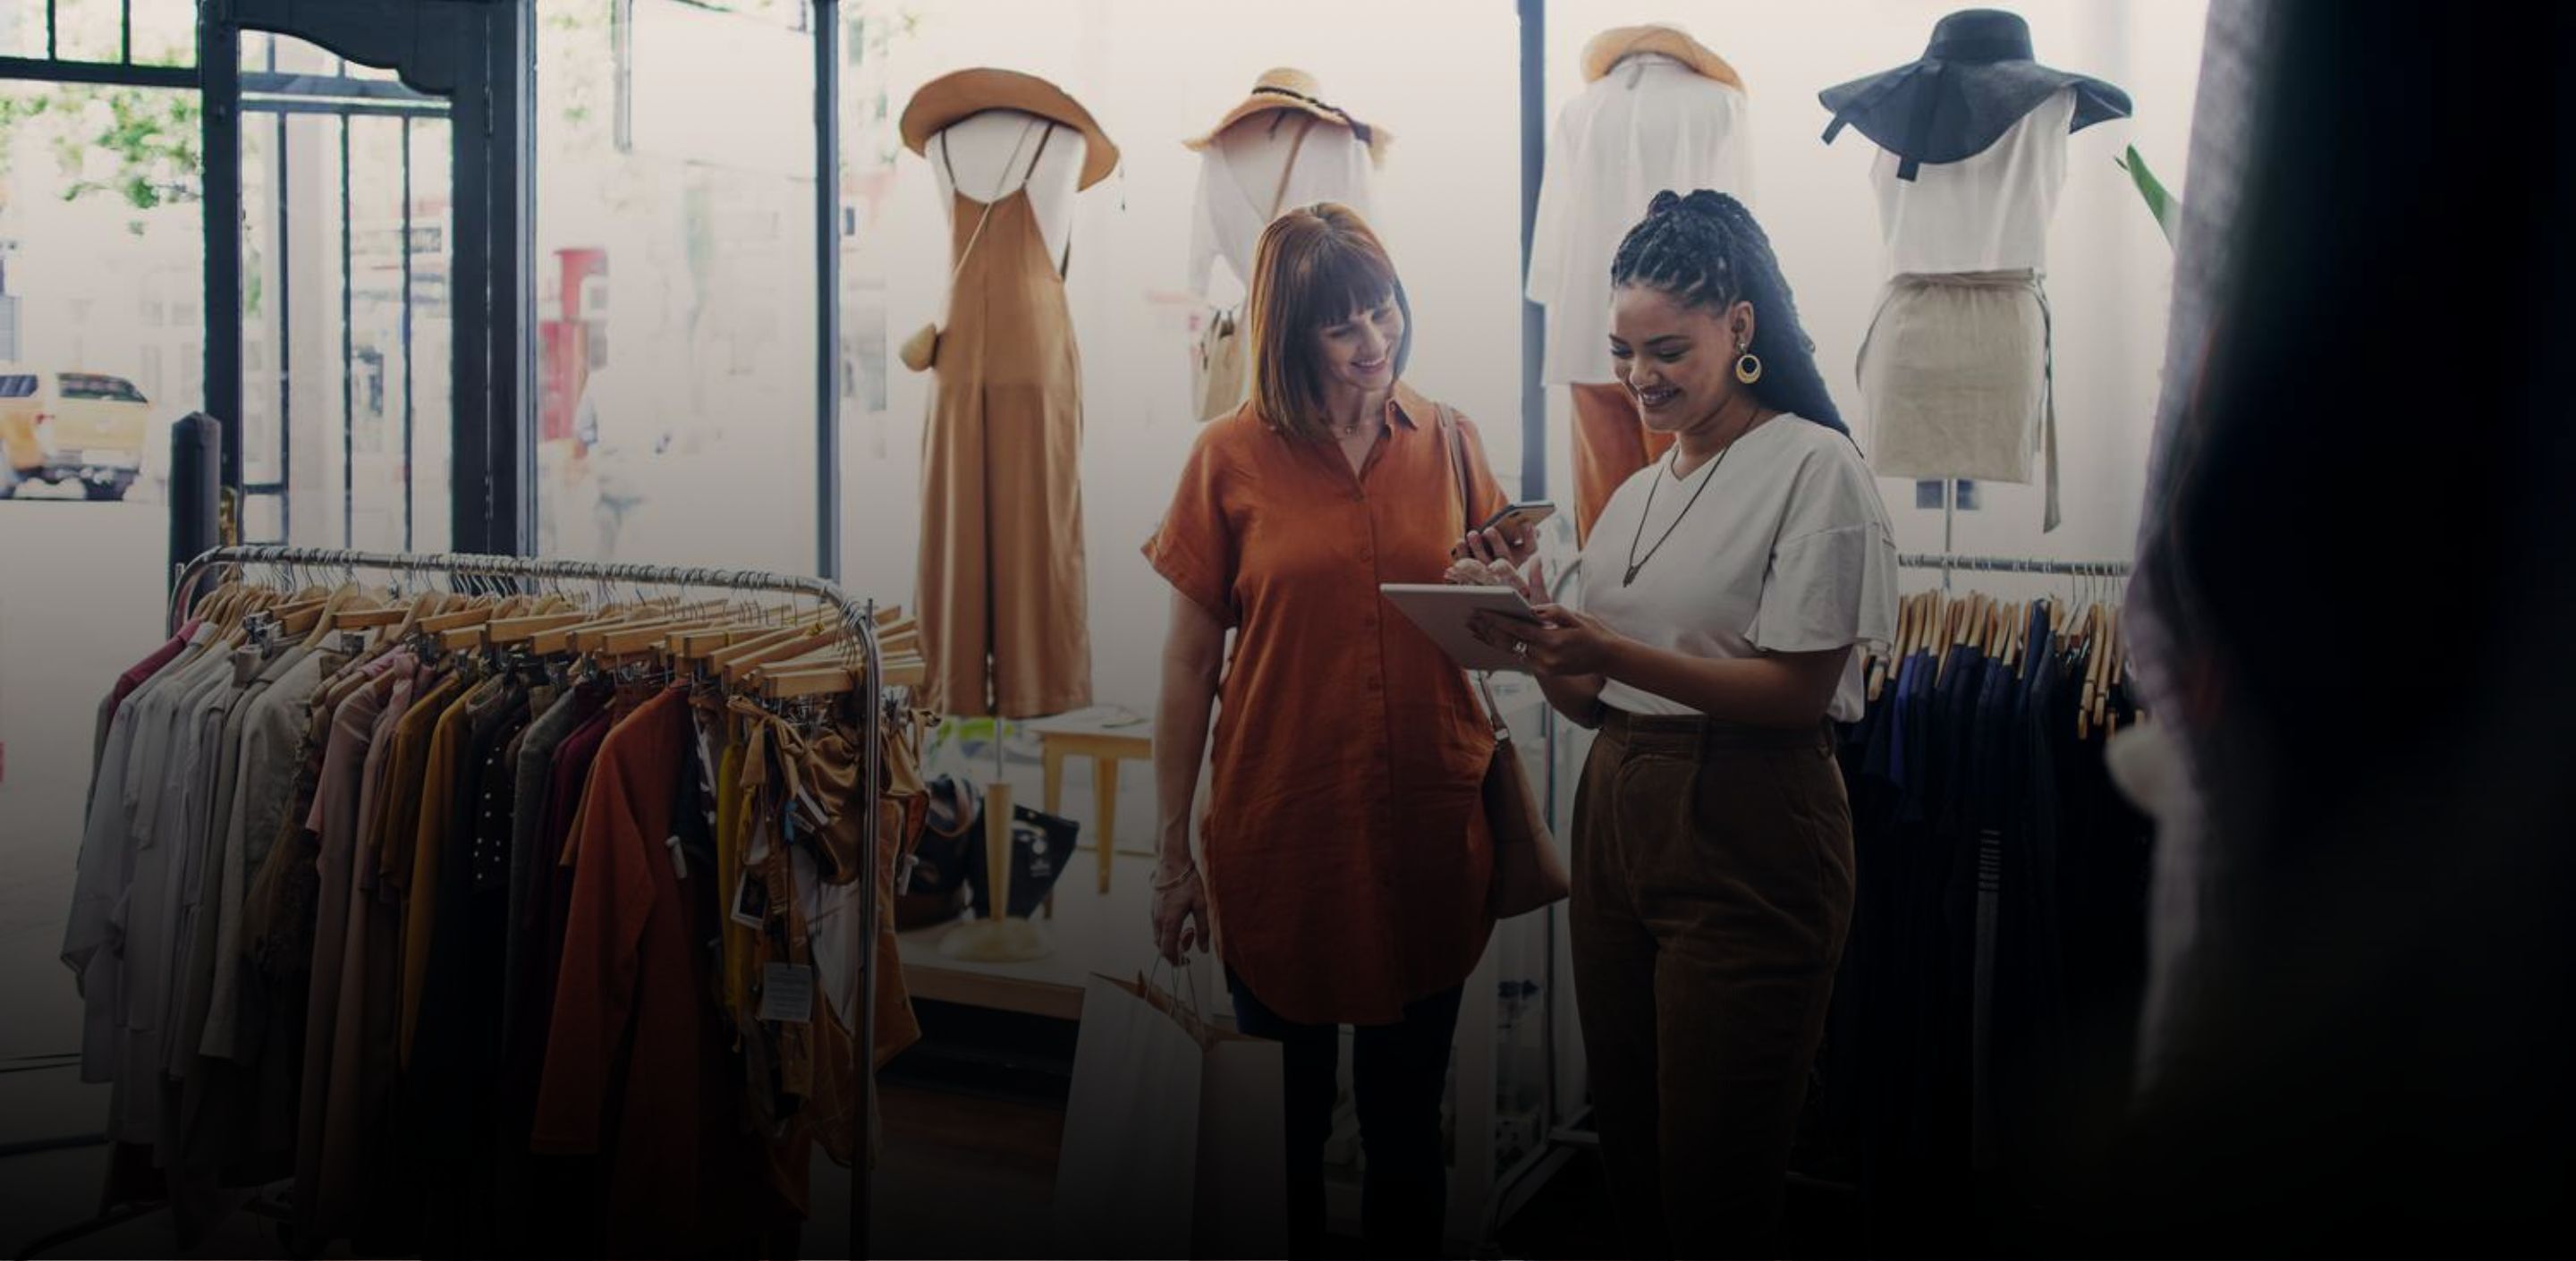 Steps to Set up Your Own Boutique Business